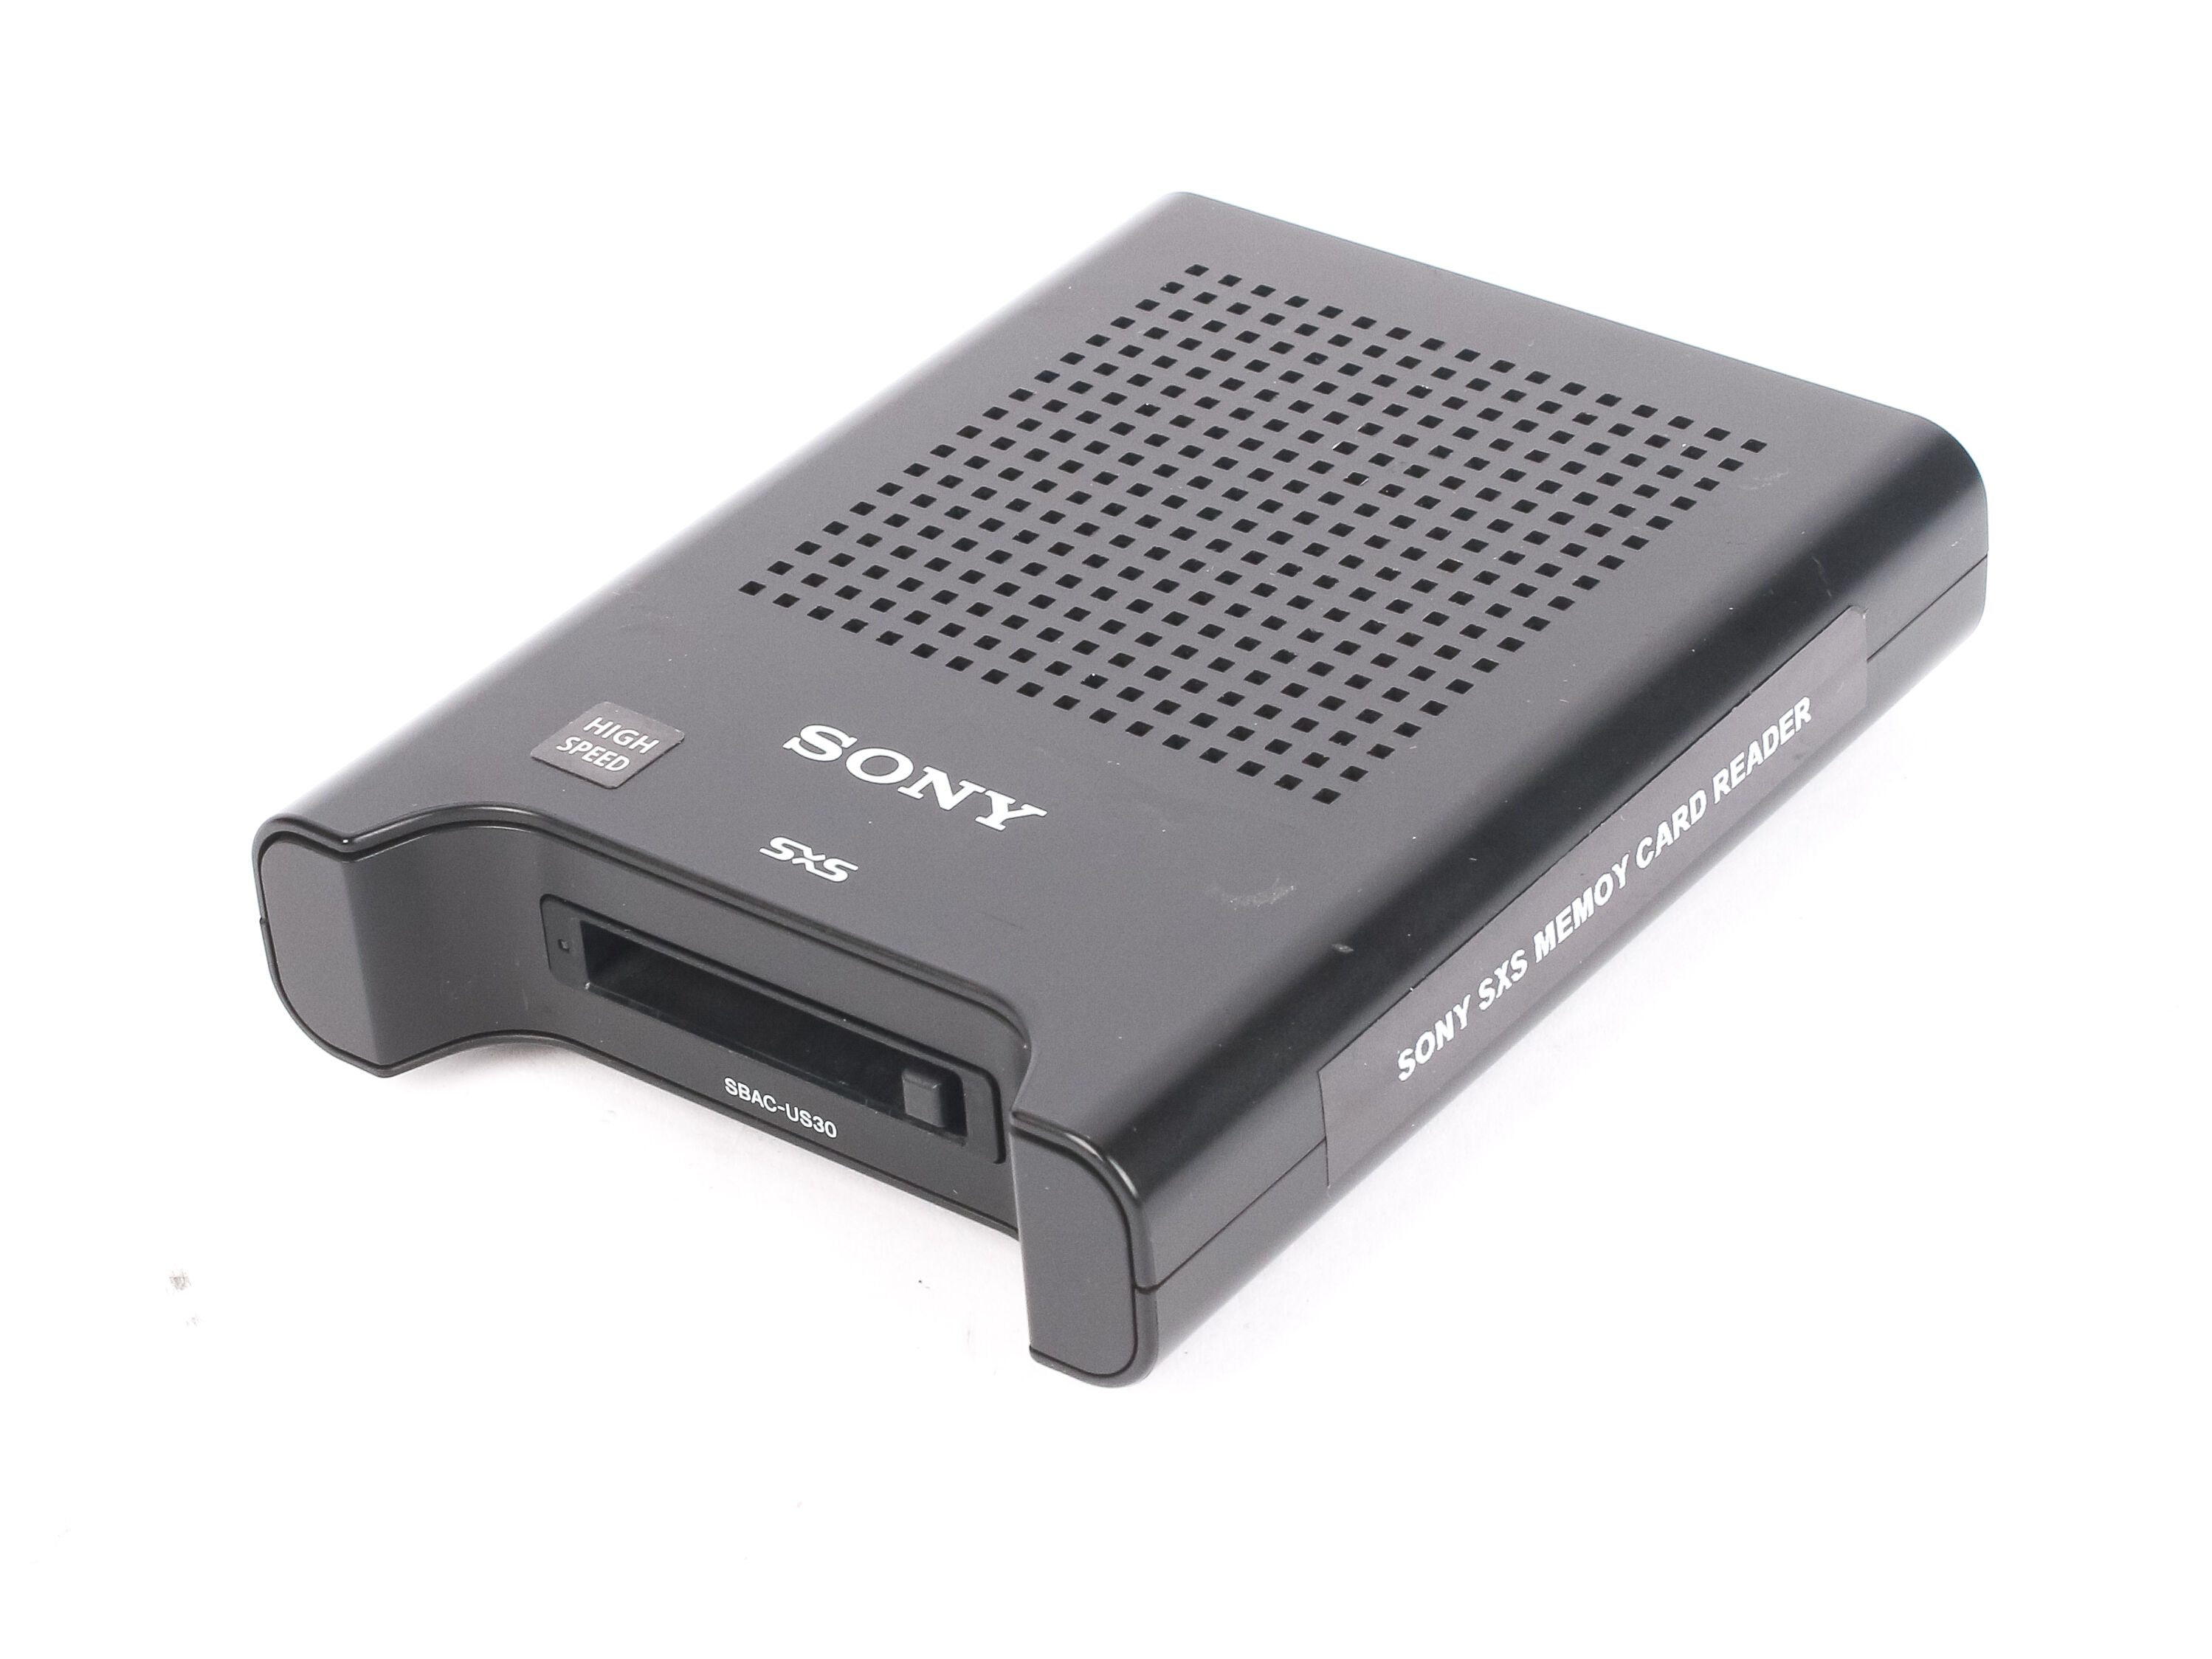 Used Sony SBAC-US20 USB 3.0 SxS Memory Card Reader